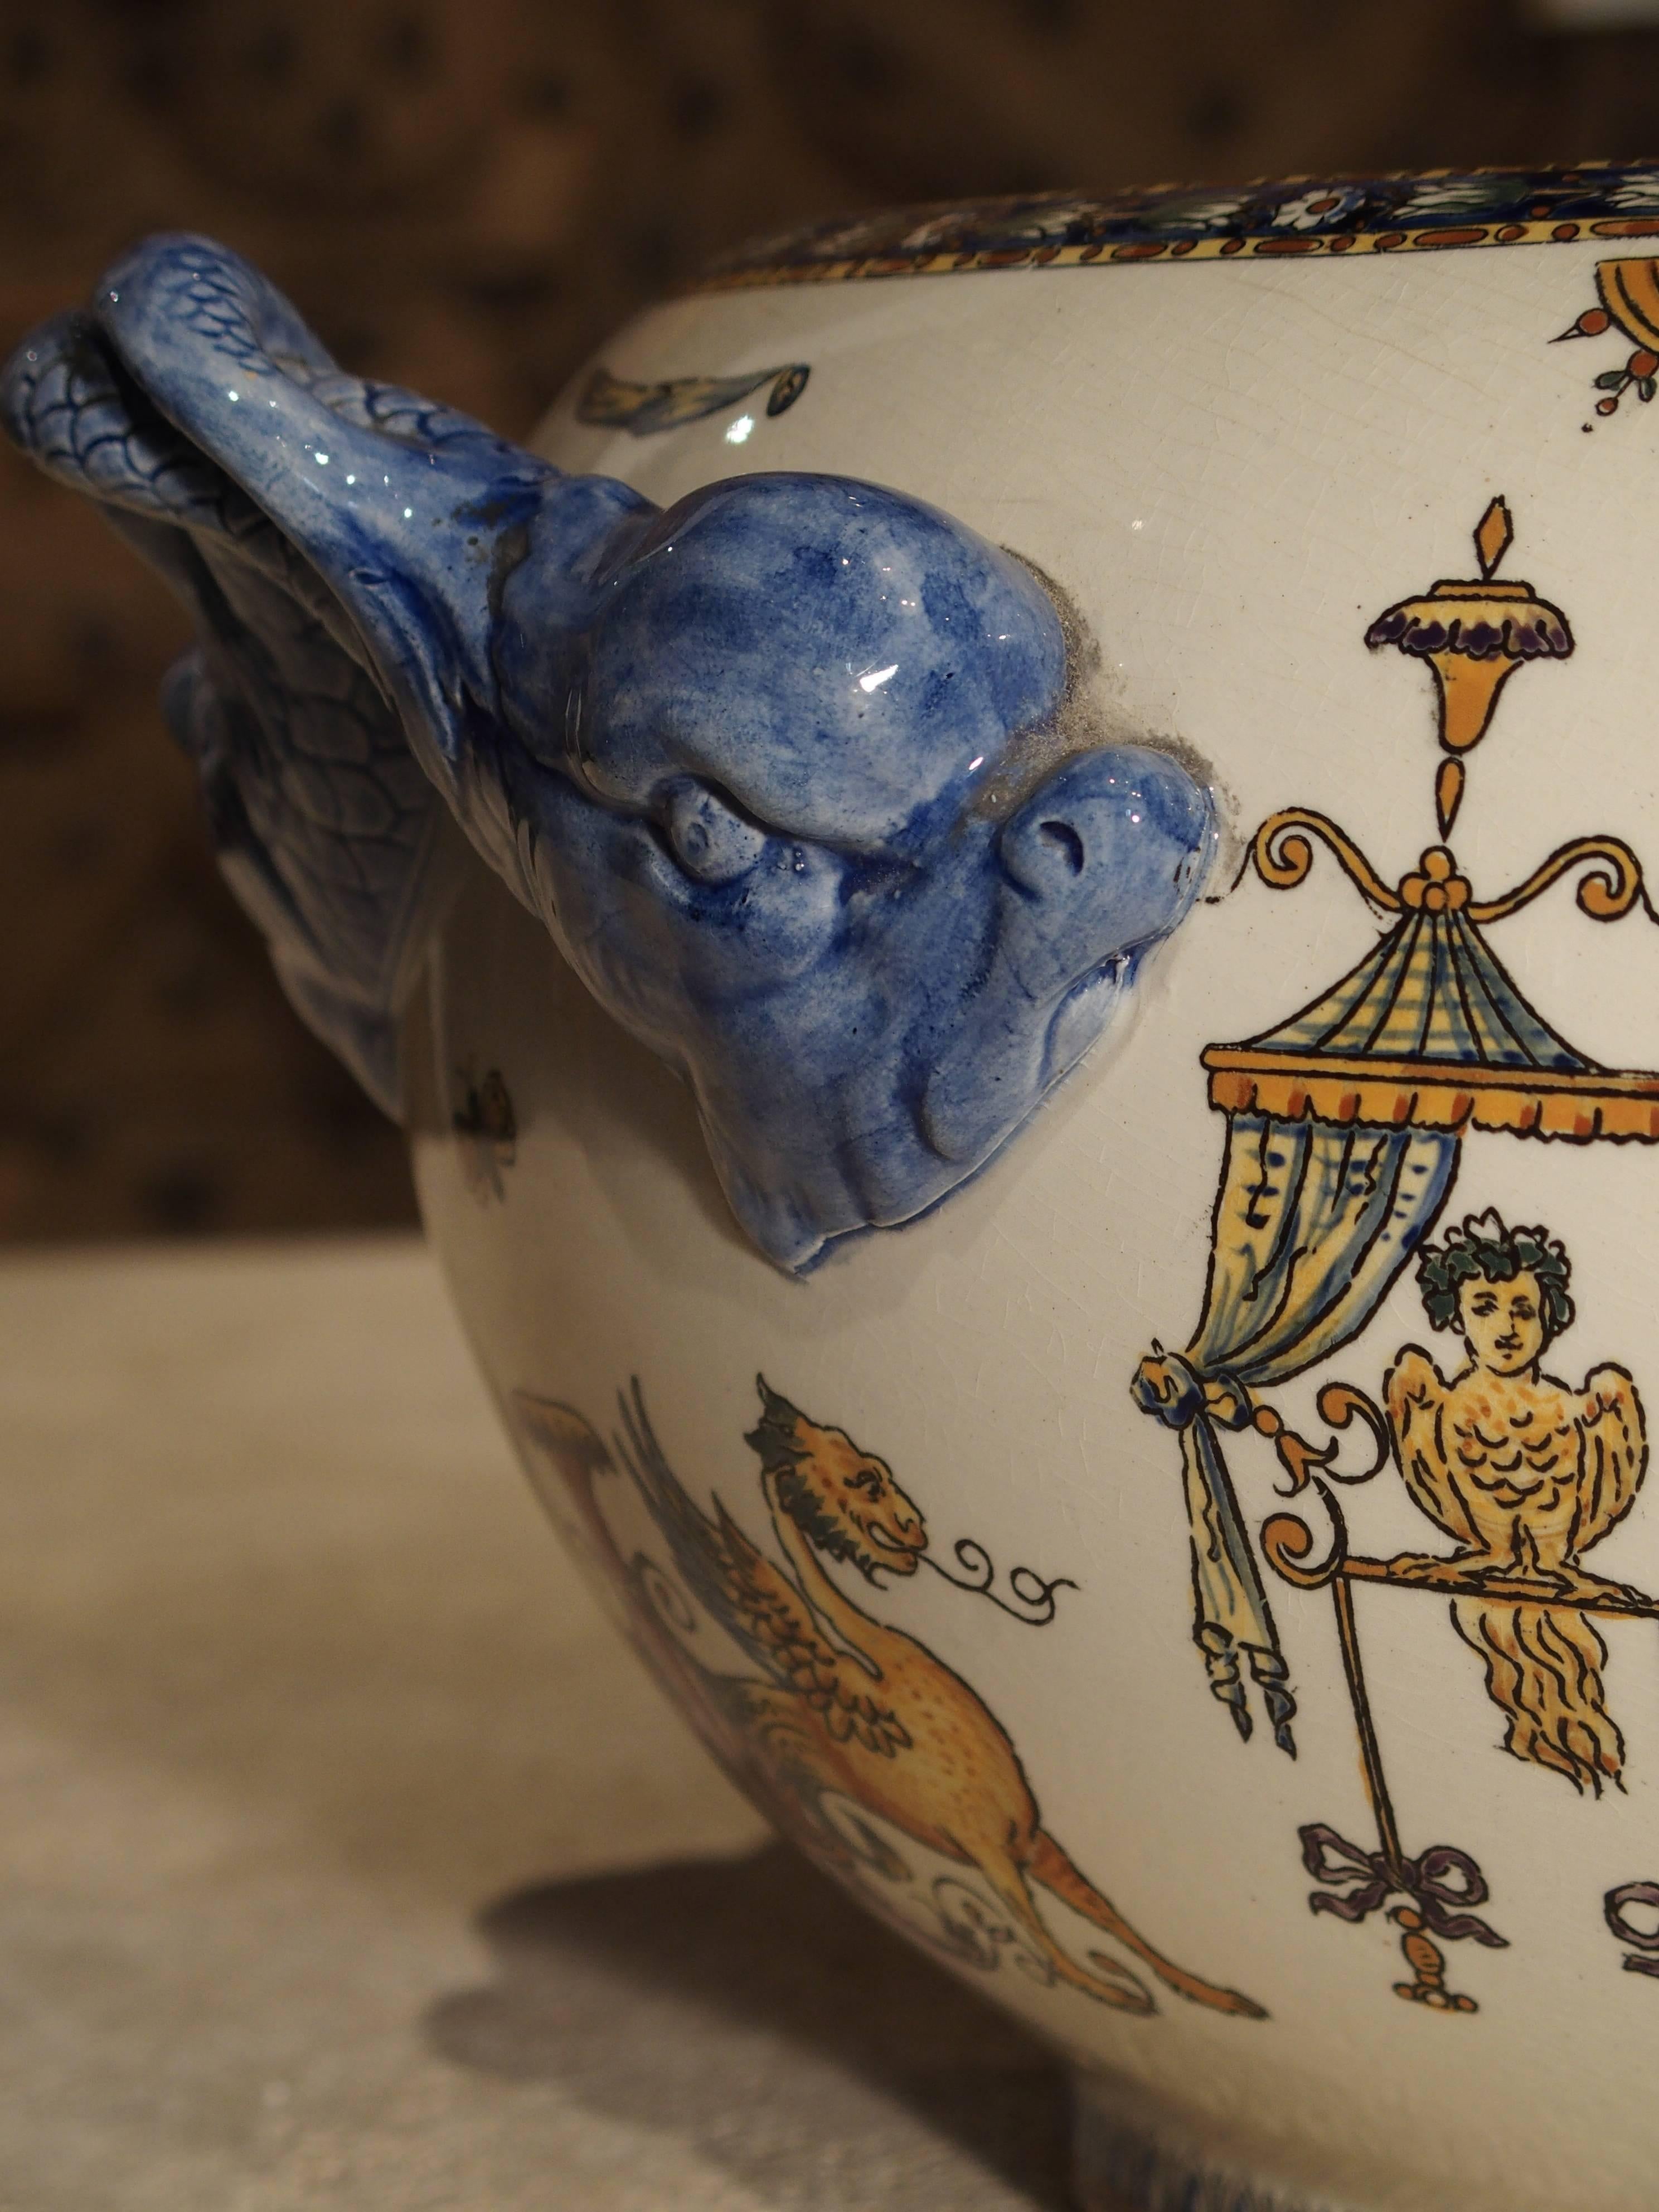 This beautiful antique French cachepot has wonderful blue dolphins for handles on either side. The white ground color is highlighted with mythological scenes. Hand-painted in golds, blues, oranges, reds, yellows and more. There is a hand-painted